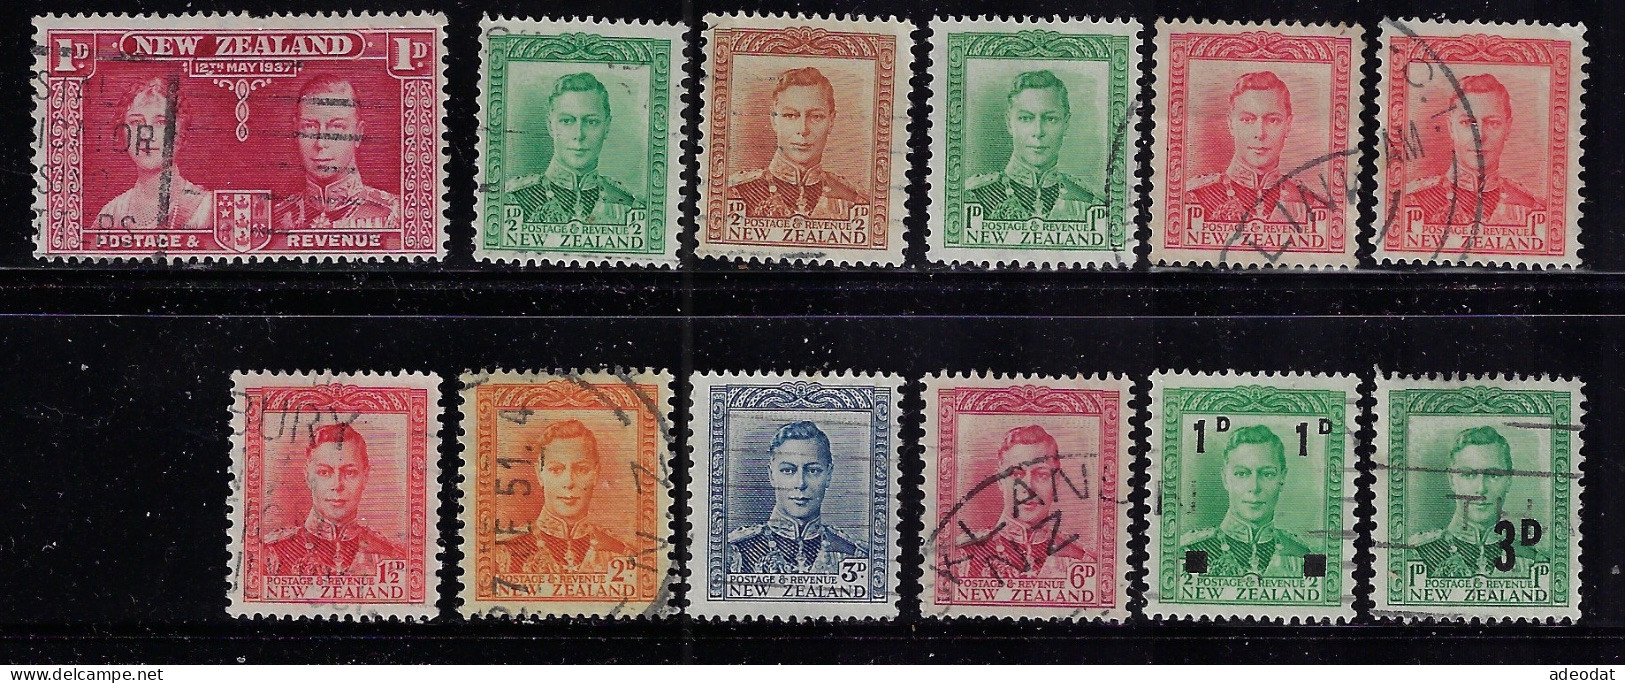 NEW ZEALAND 1937-41 QUEEN ELISABETH And KING GEORGE VI  SCOTT #223,226...228C ,USED - Usati